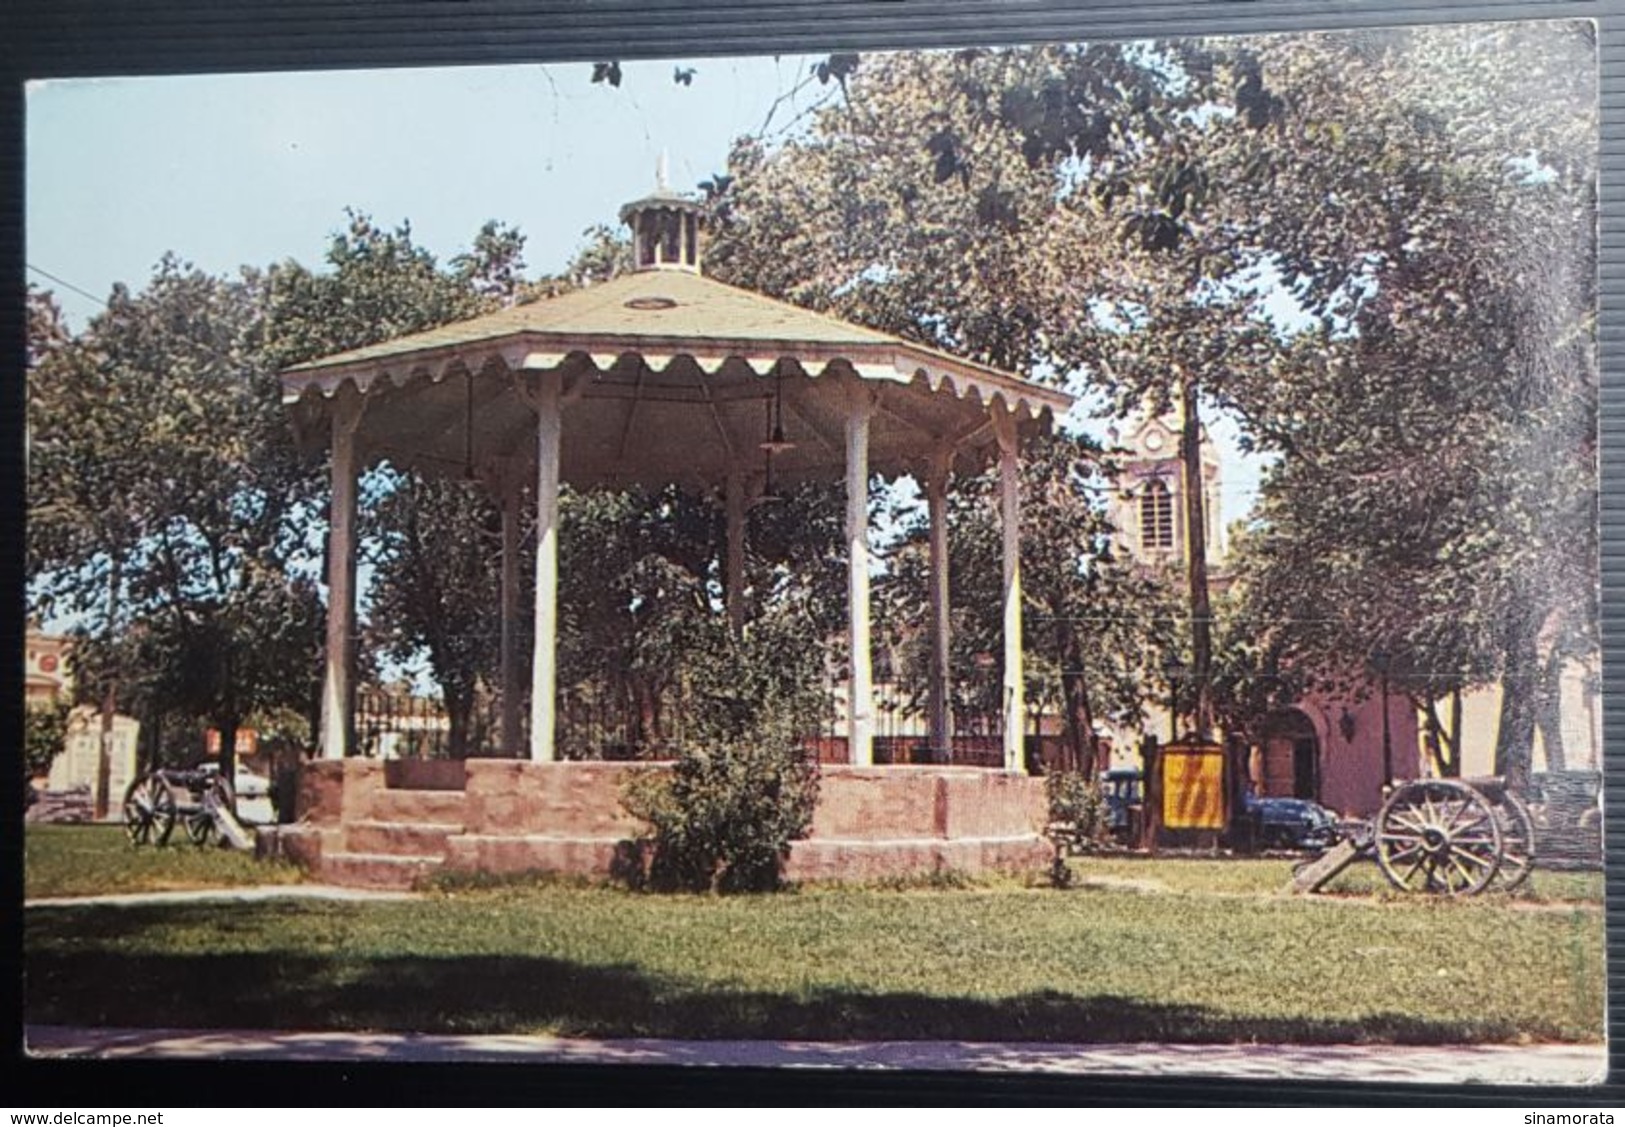 United States - Bandstand On Old Town Plaza. Albuquerque, New Mexico - Albuquerque